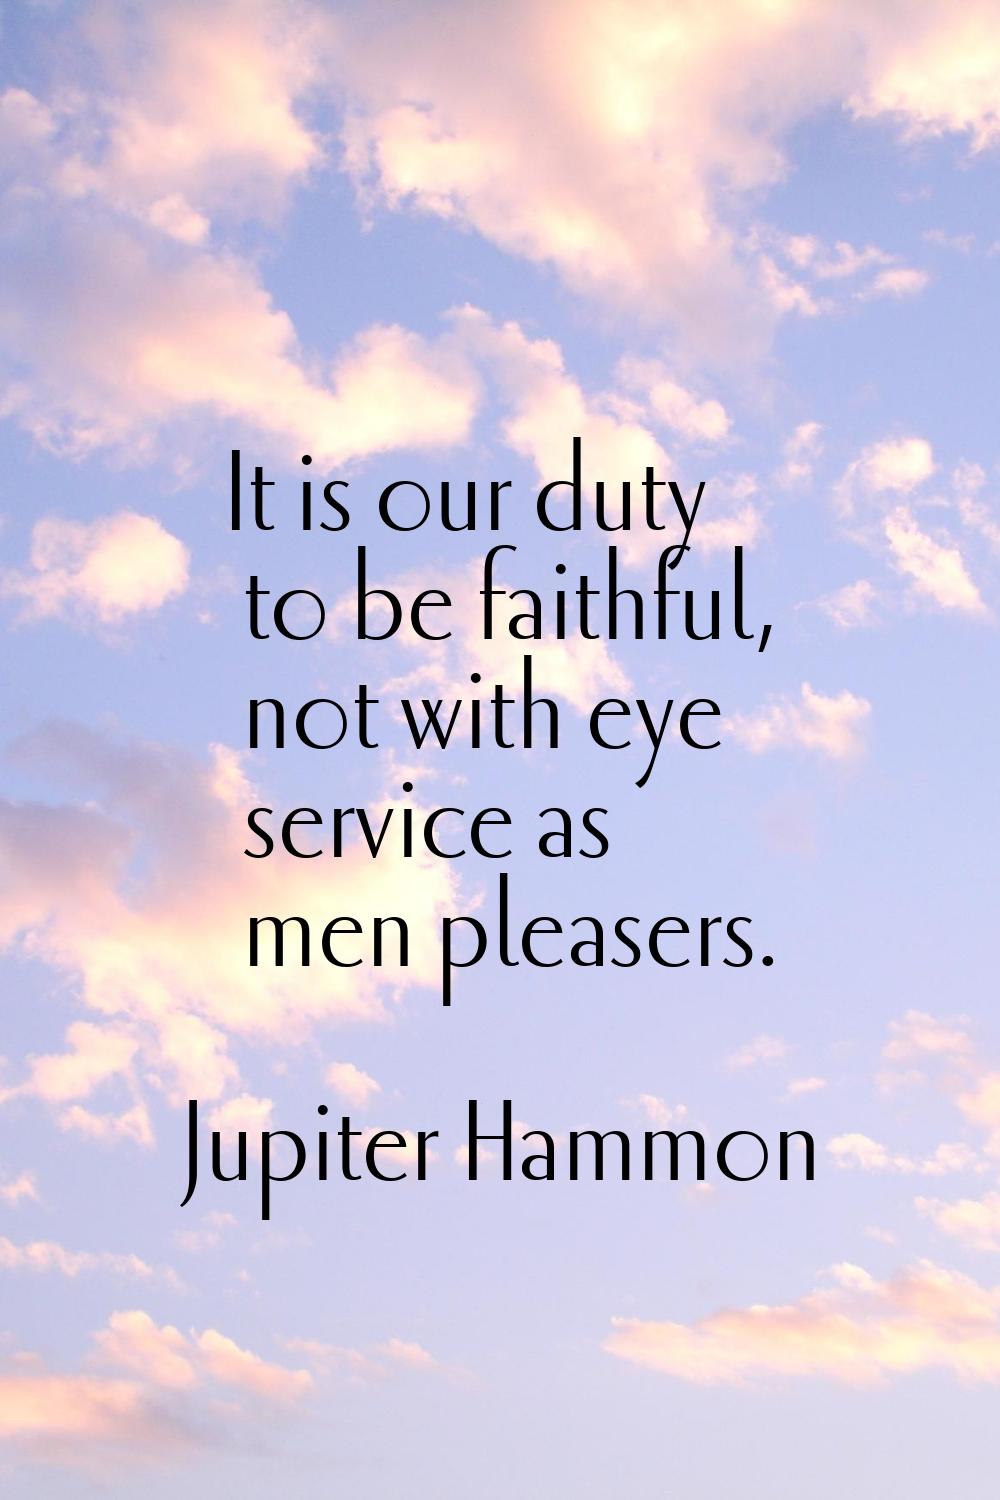 It is our duty to be faithful, not with eye service as men pleasers.